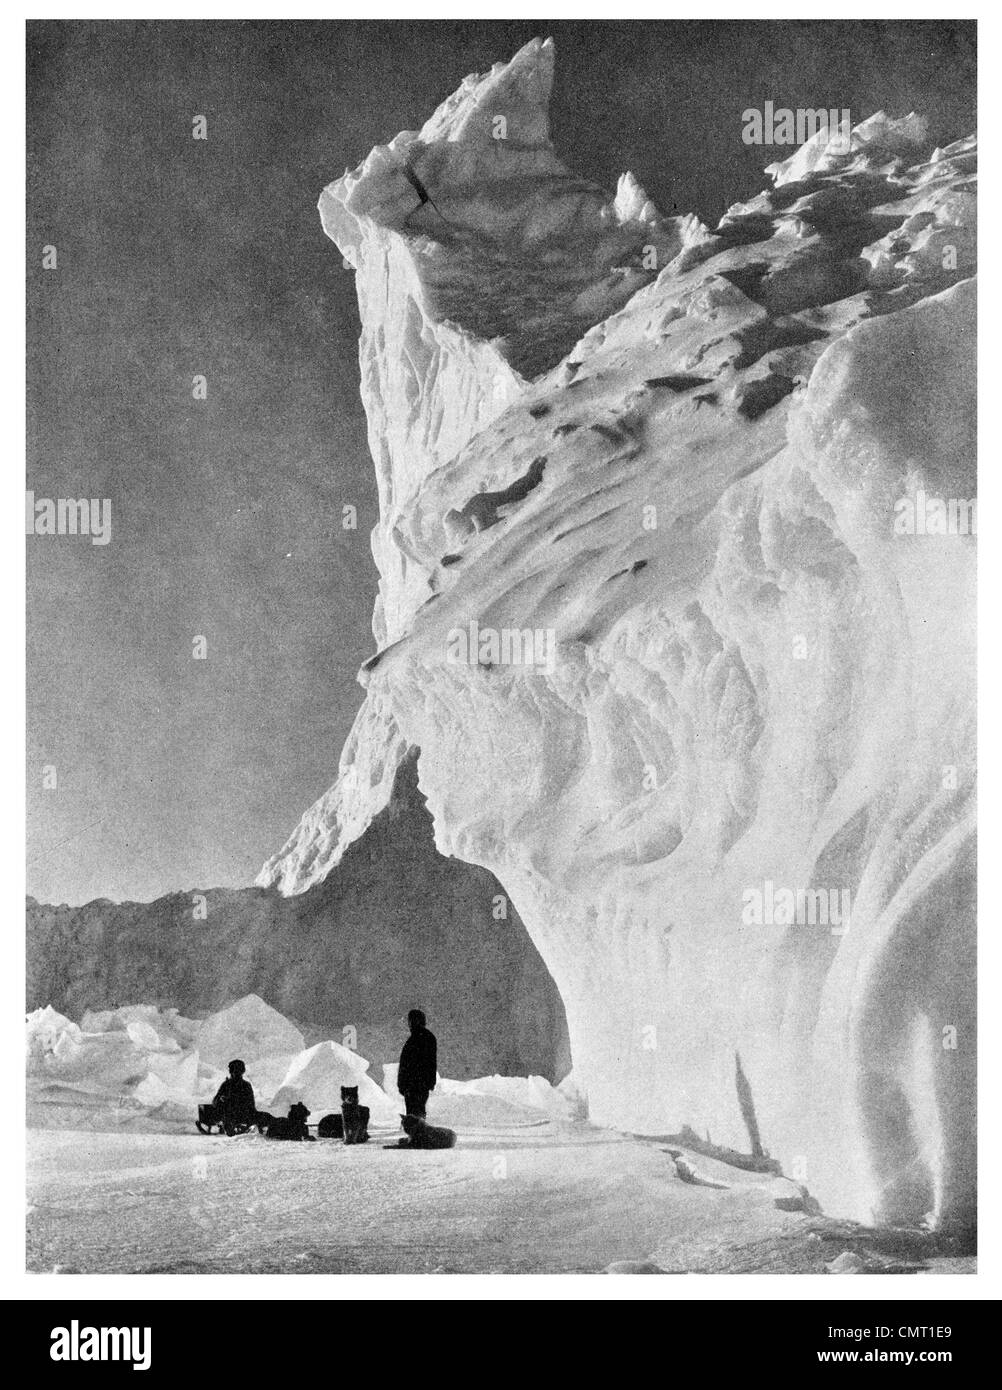 1912 Dog team resting on Iceberg Antarctic Great ice barrier Terra Nova Expedition, officially the British Antarctic Expedition Stock Photo